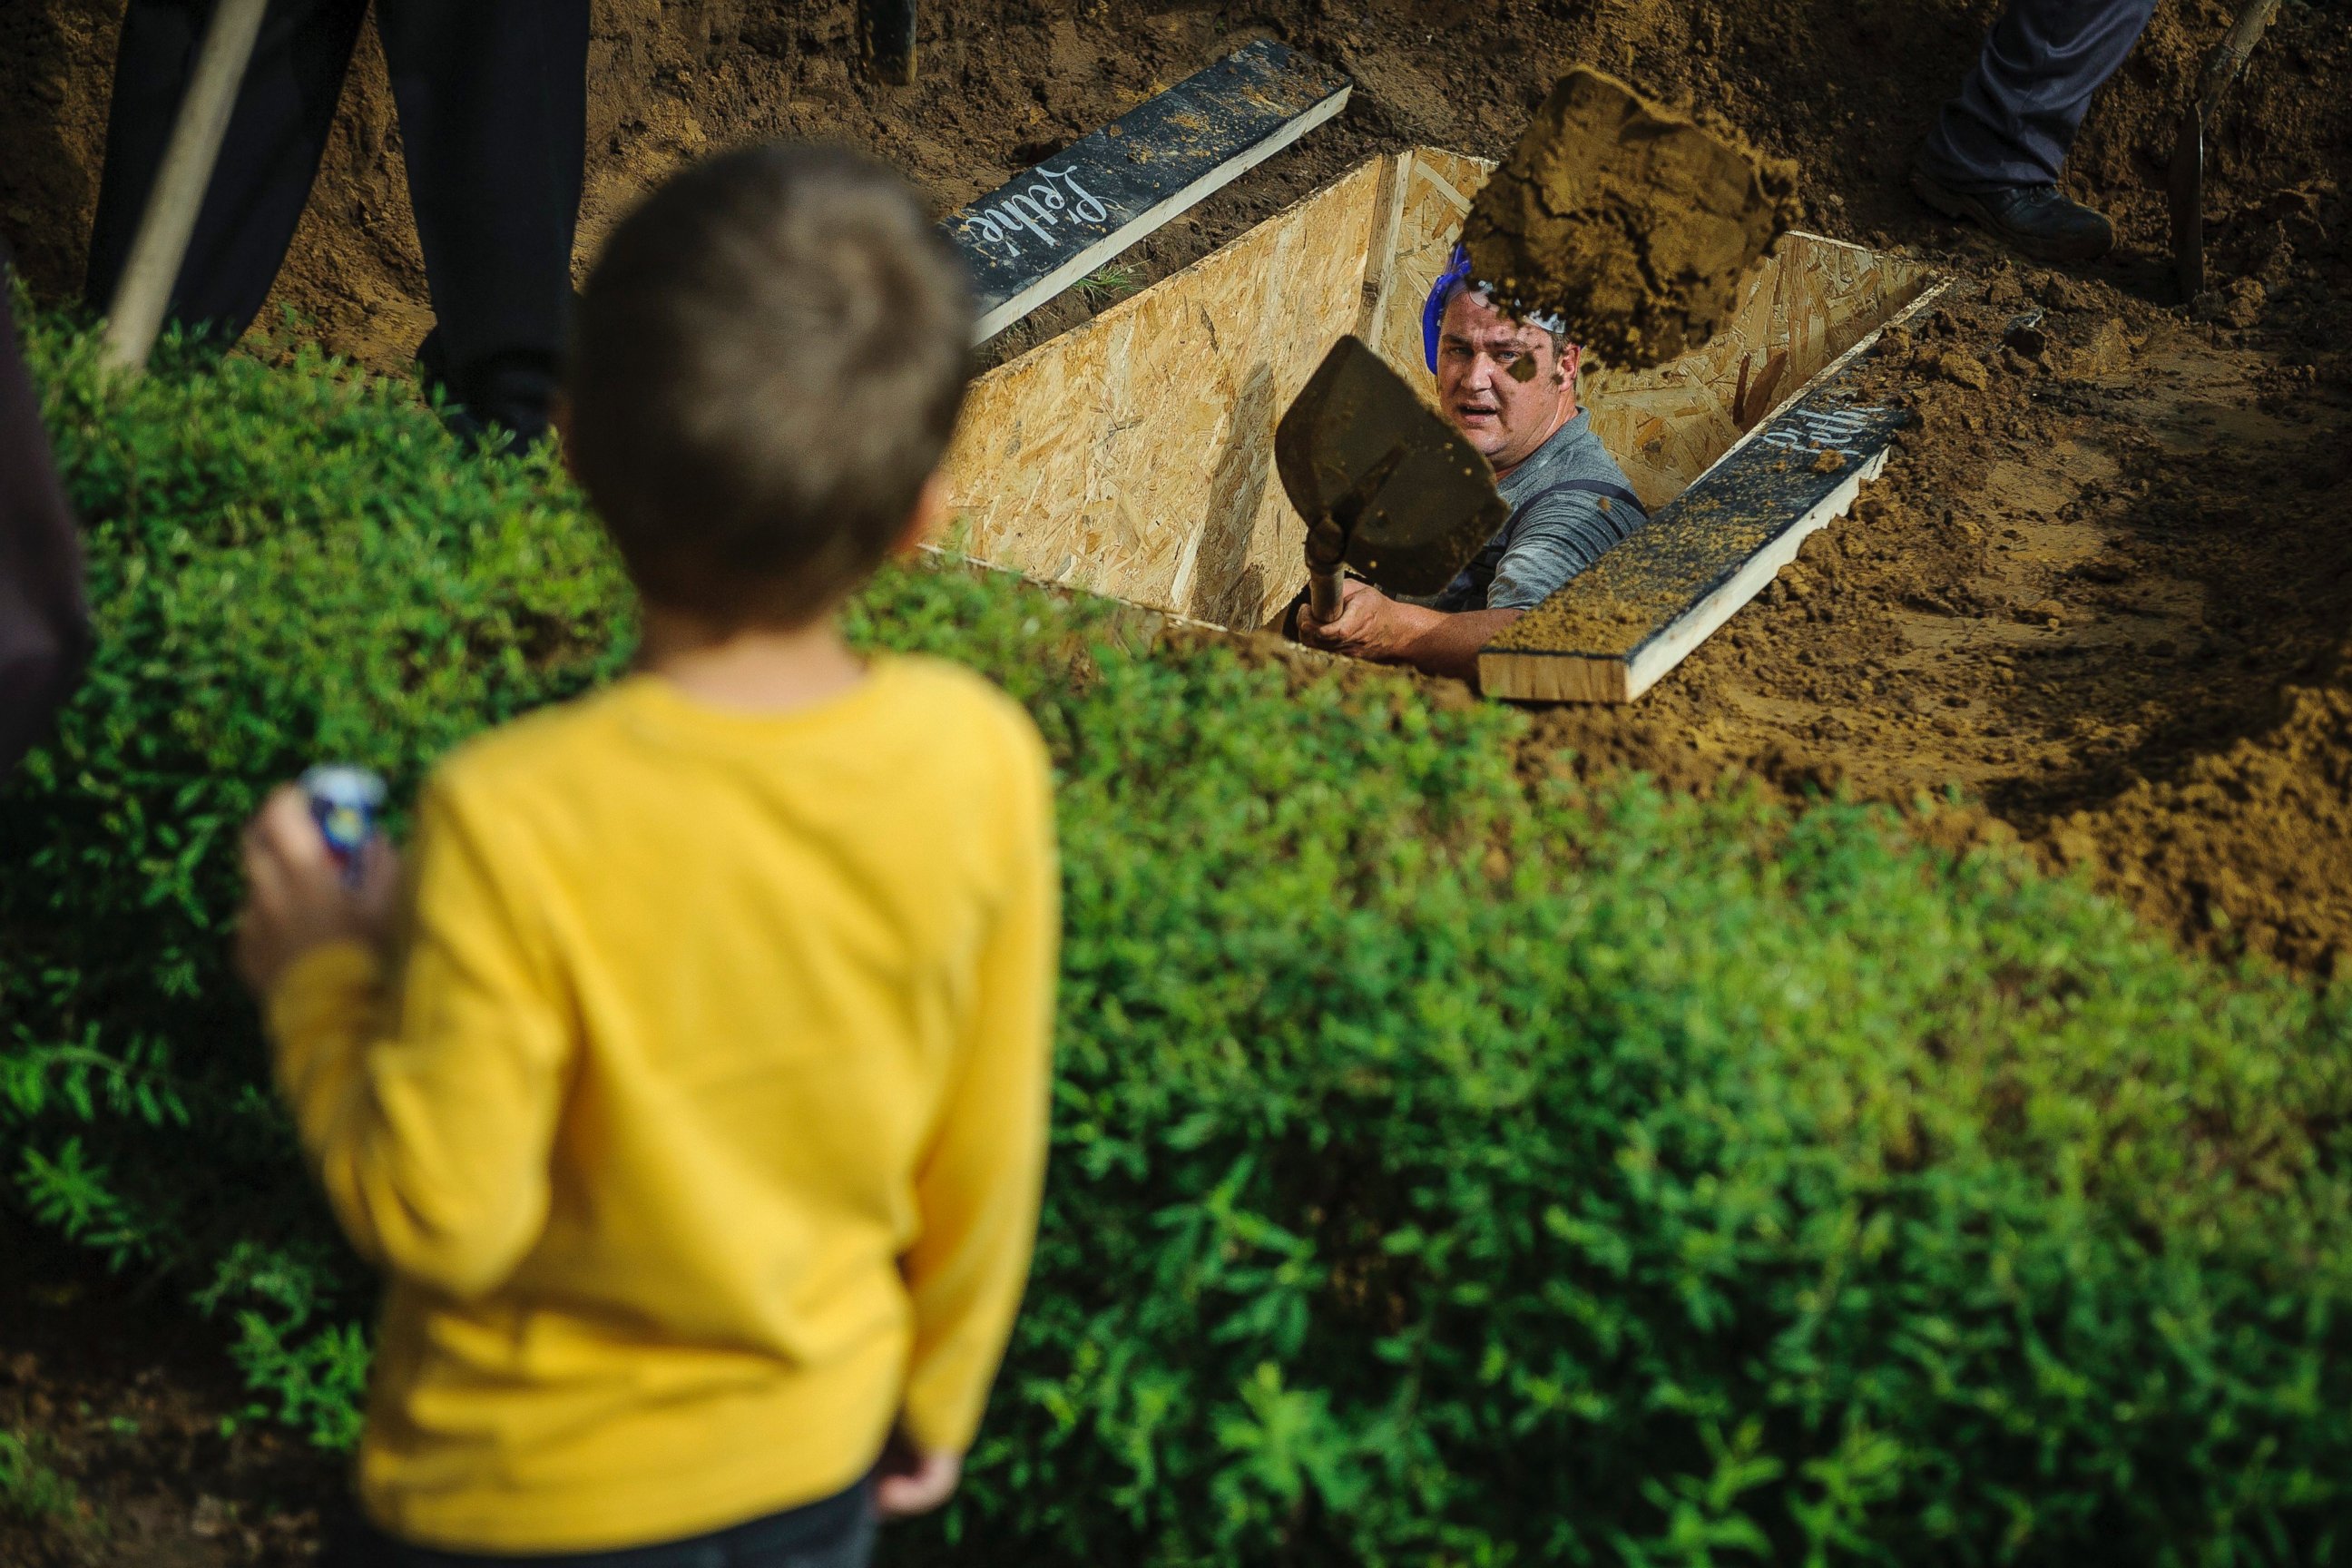 PHOTO: A gravedigger competes while a boy looks on during the first National Grave Digging competition at the public cemetery of Debrecen, Hungary, June 3, 2016.